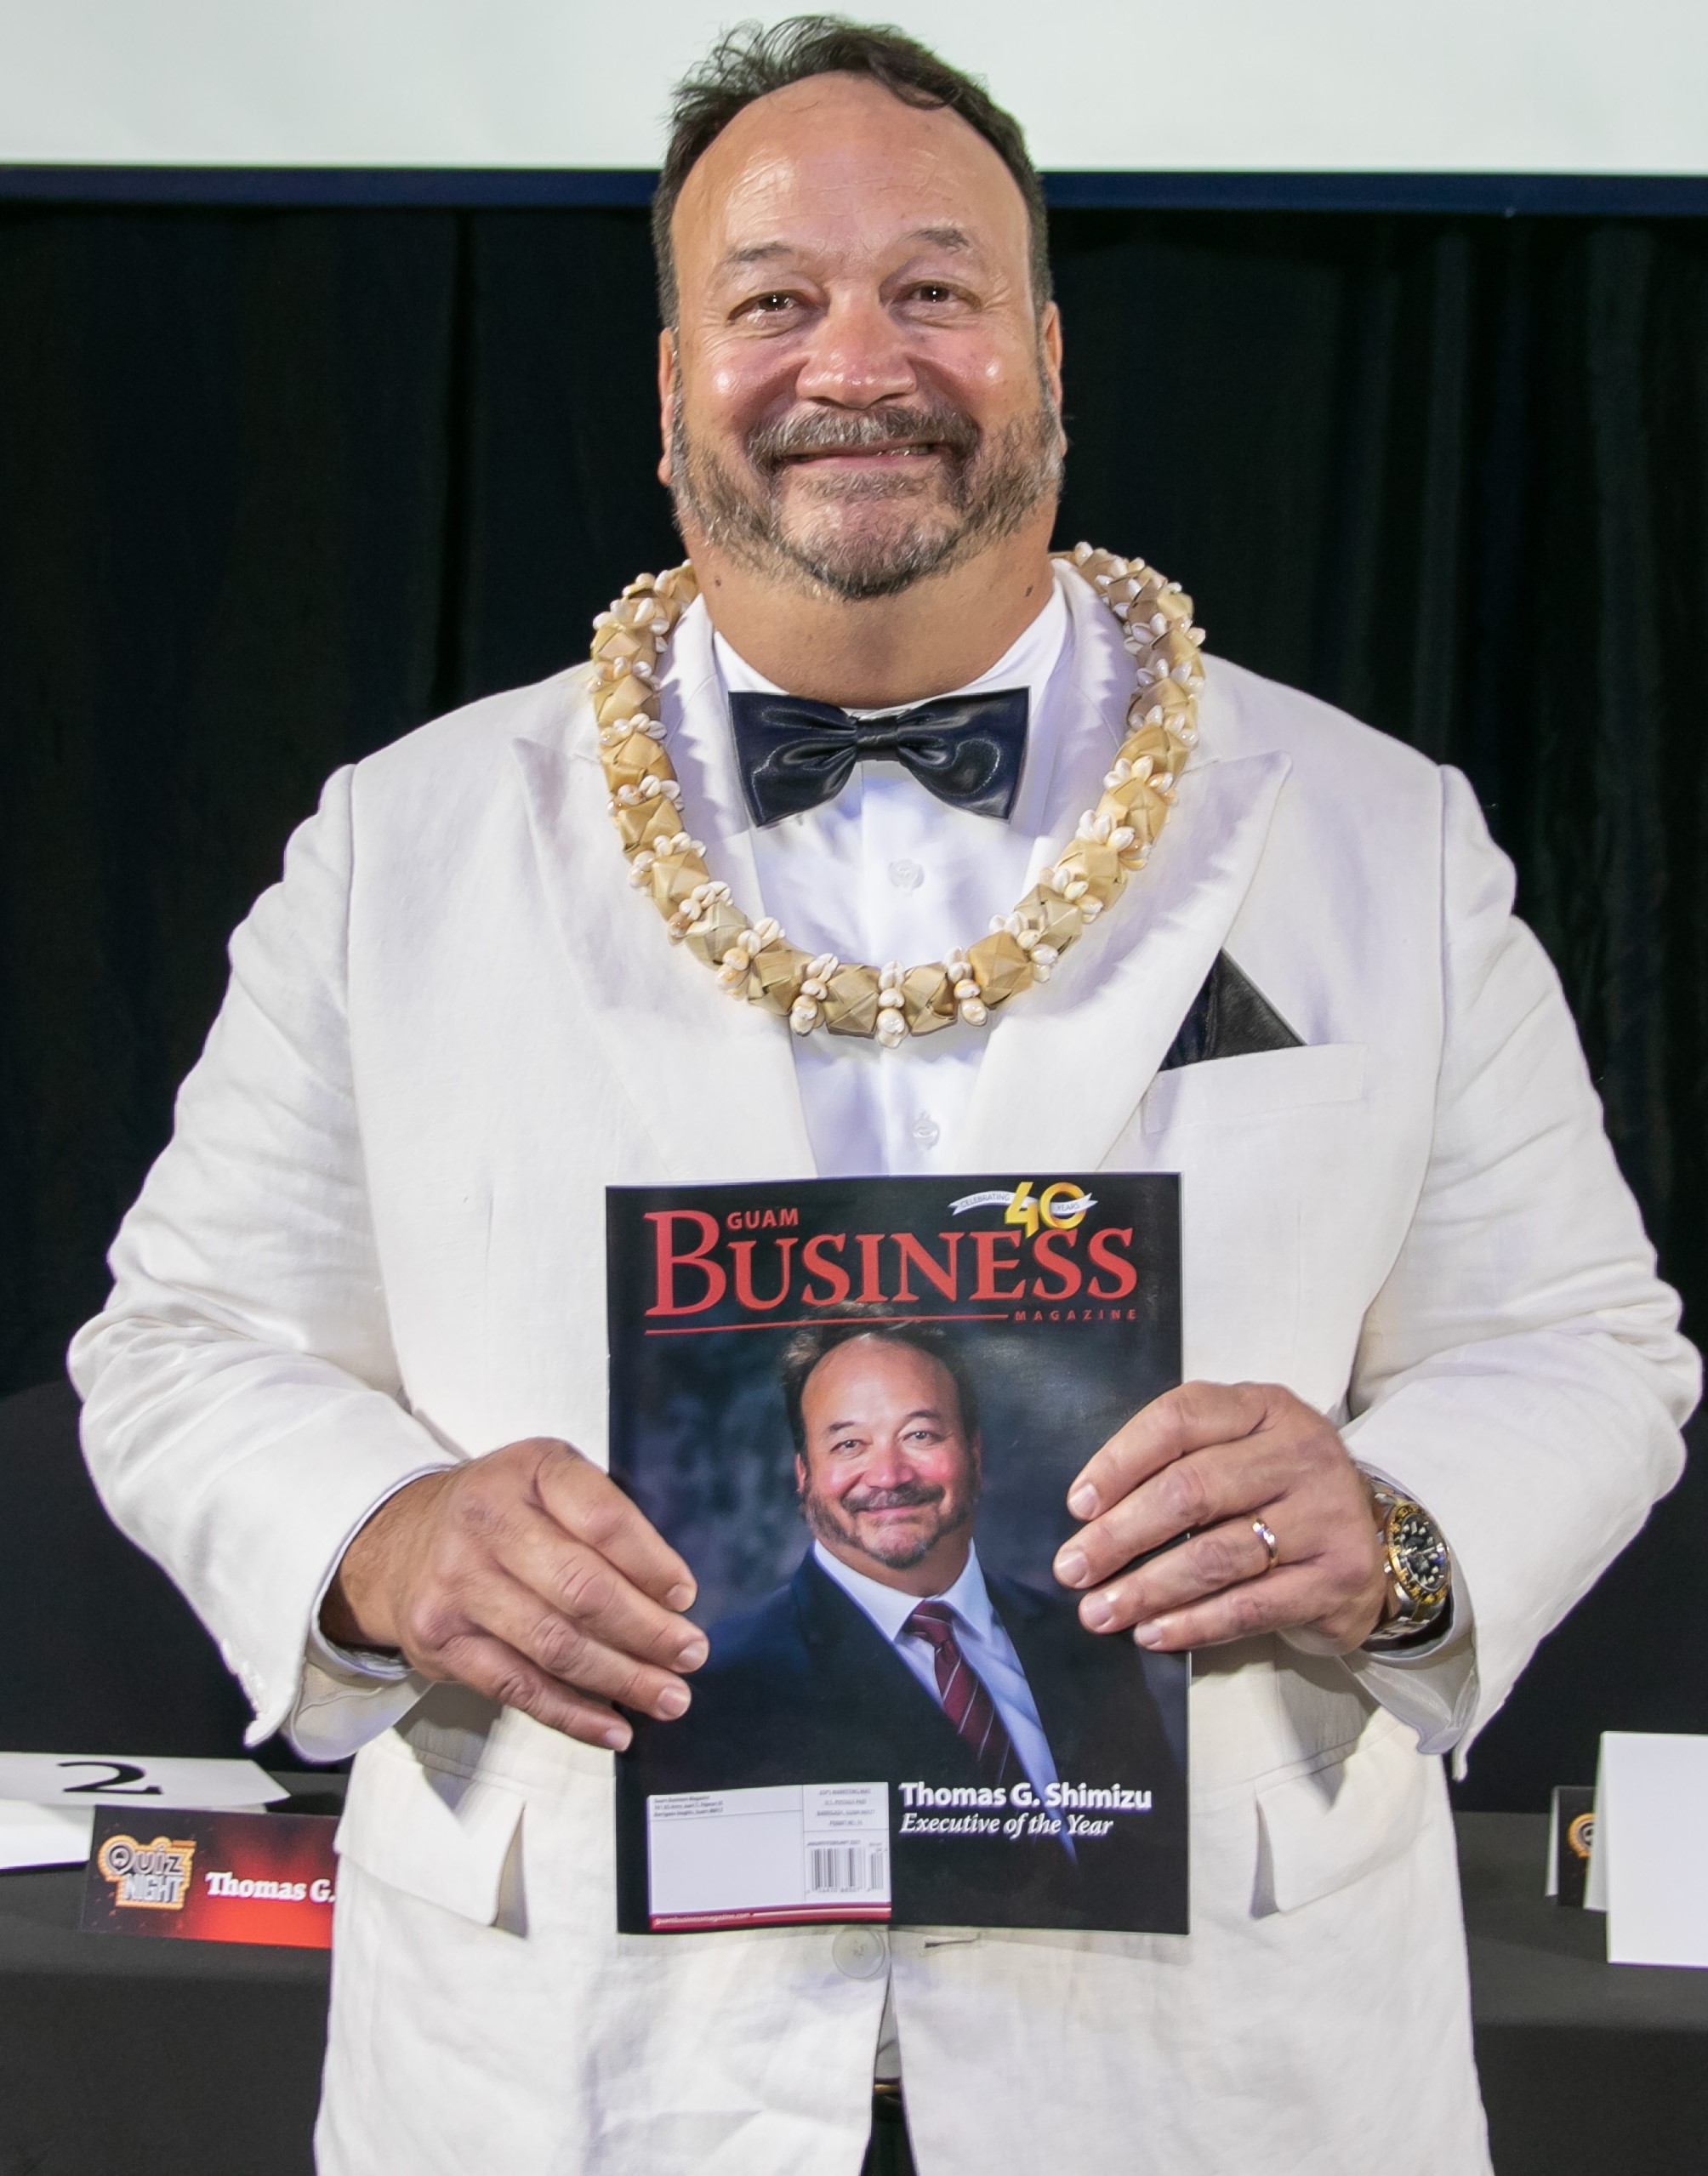 Guam Business Magazine 2022 Executive of the Year named